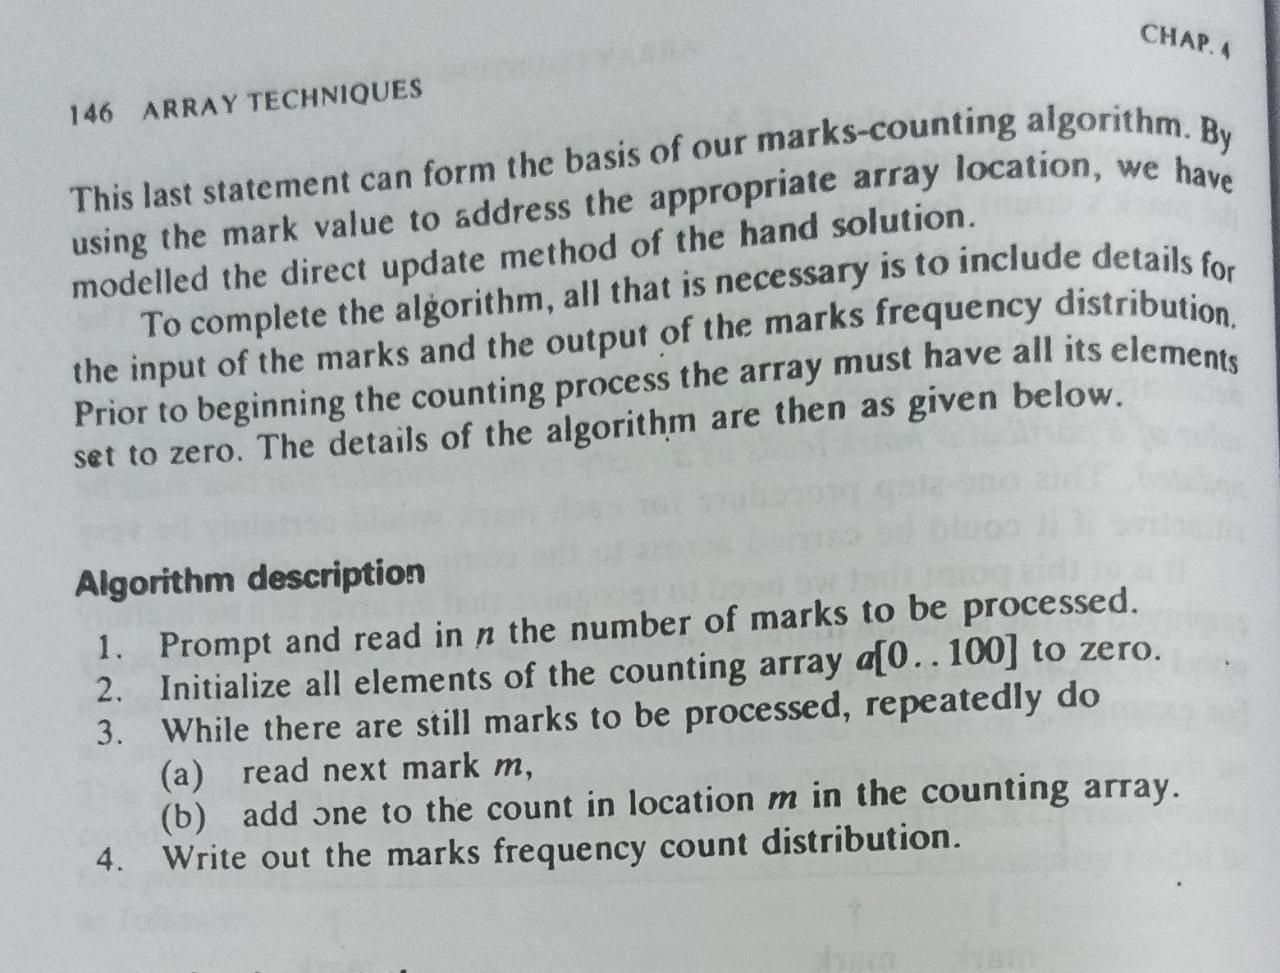 CHAP. 4 array we have This last statement can form the basis of our marks-counting algorithm. By using the